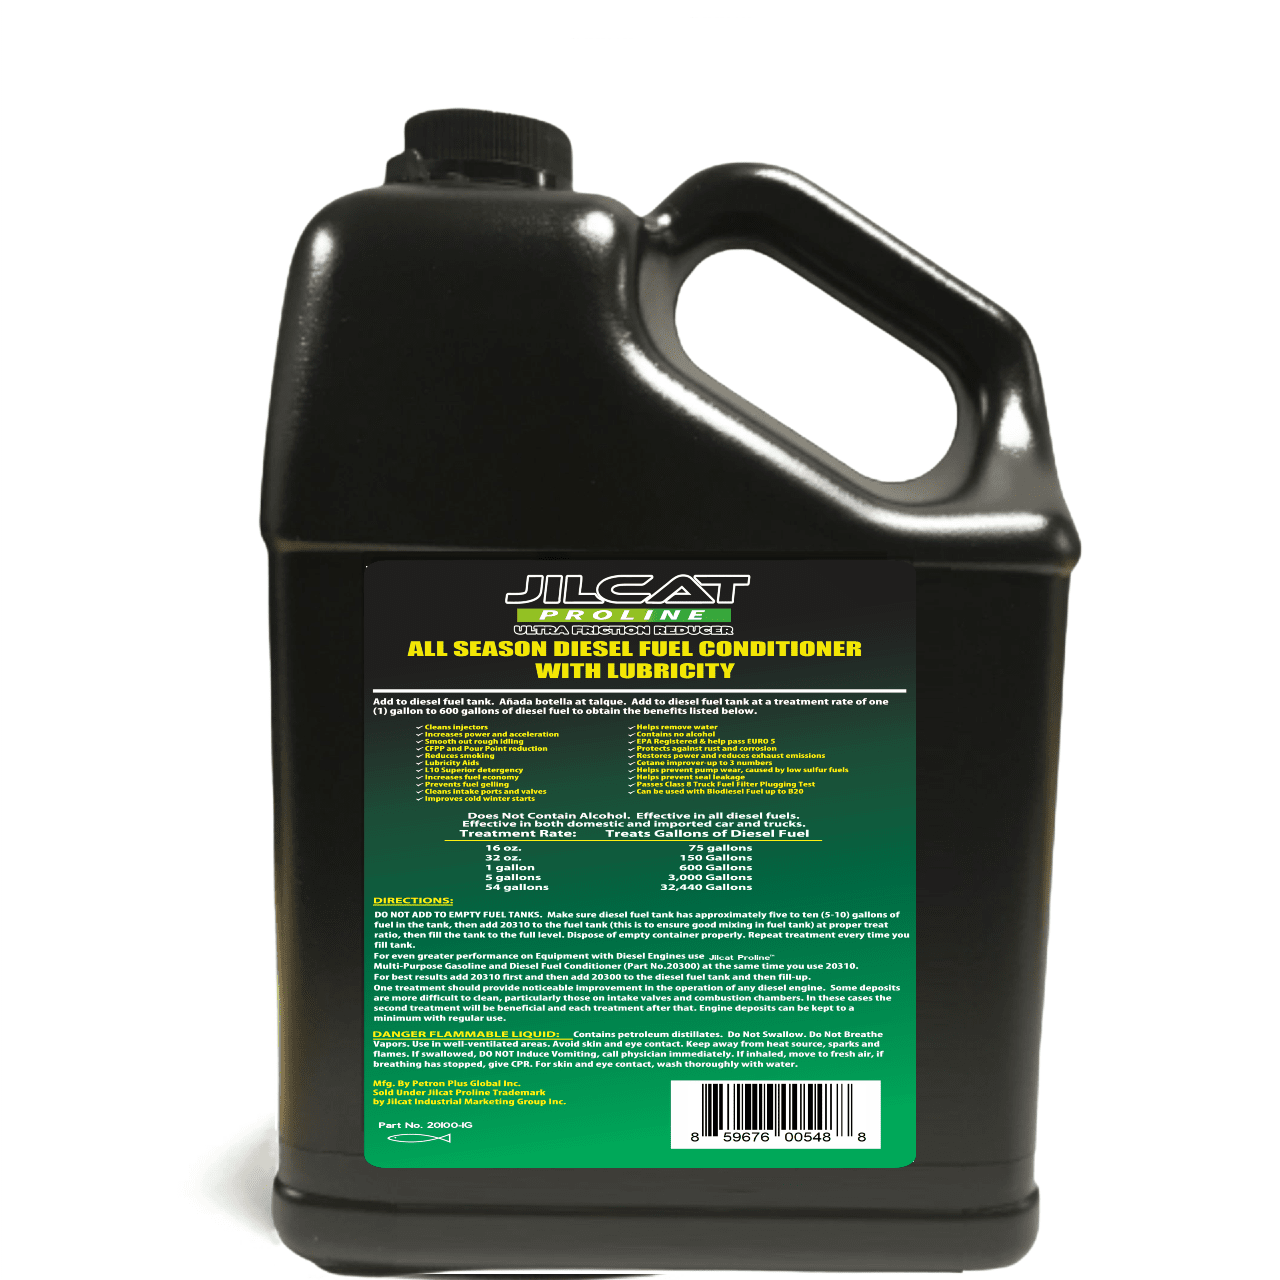 All Season Diesel Fuel Conditioner with Lubricity Gallon